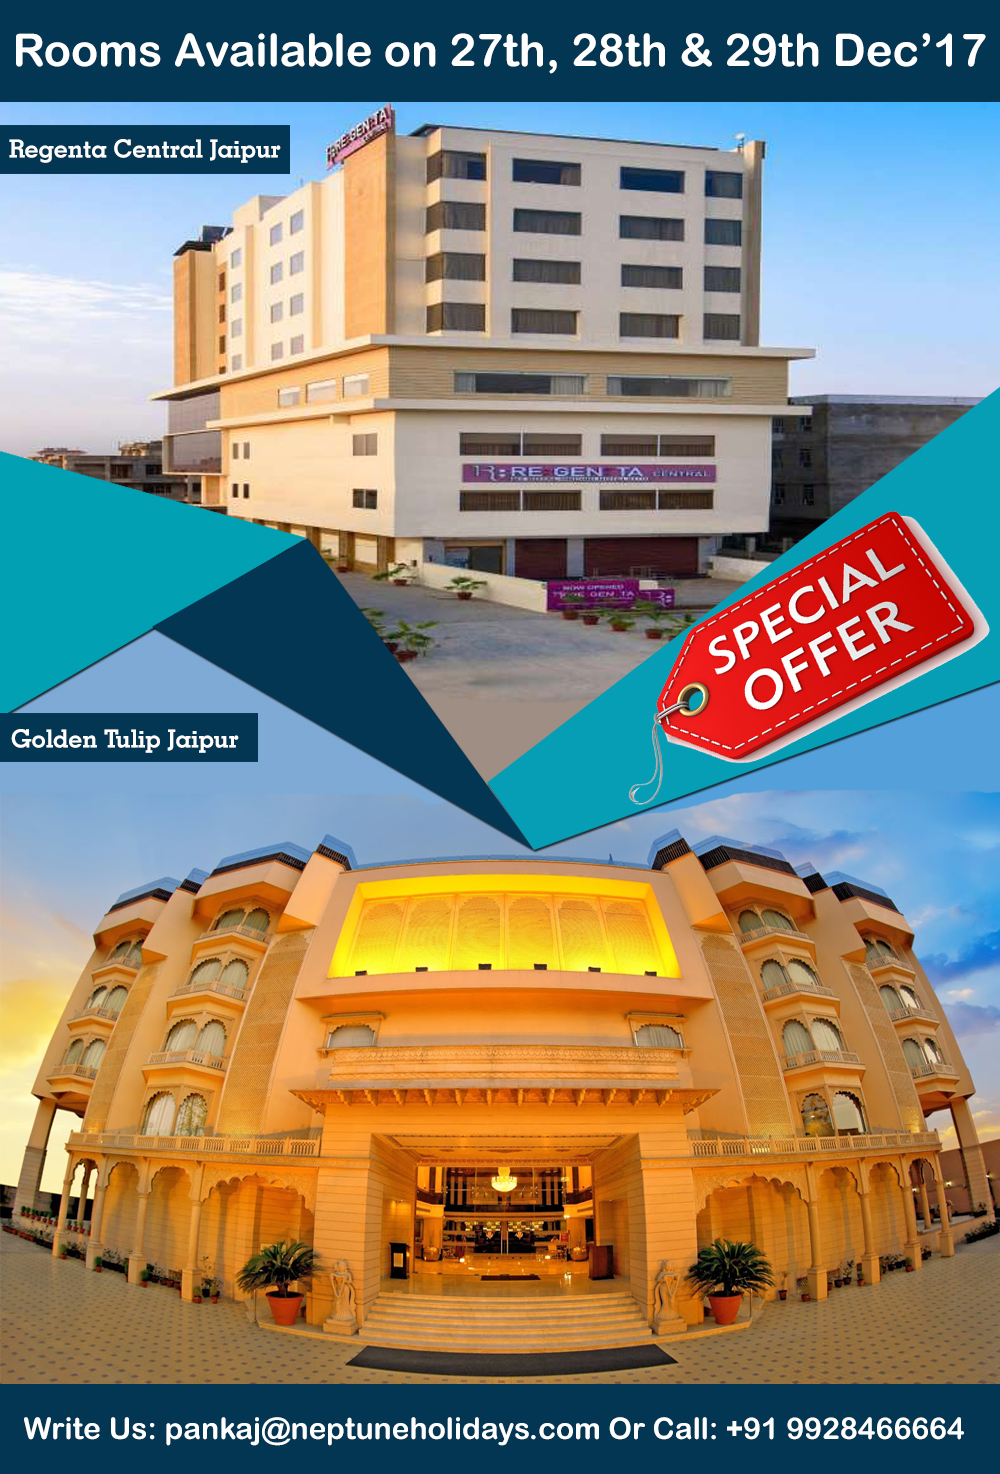 Rooms Available at Jaipur Hotels